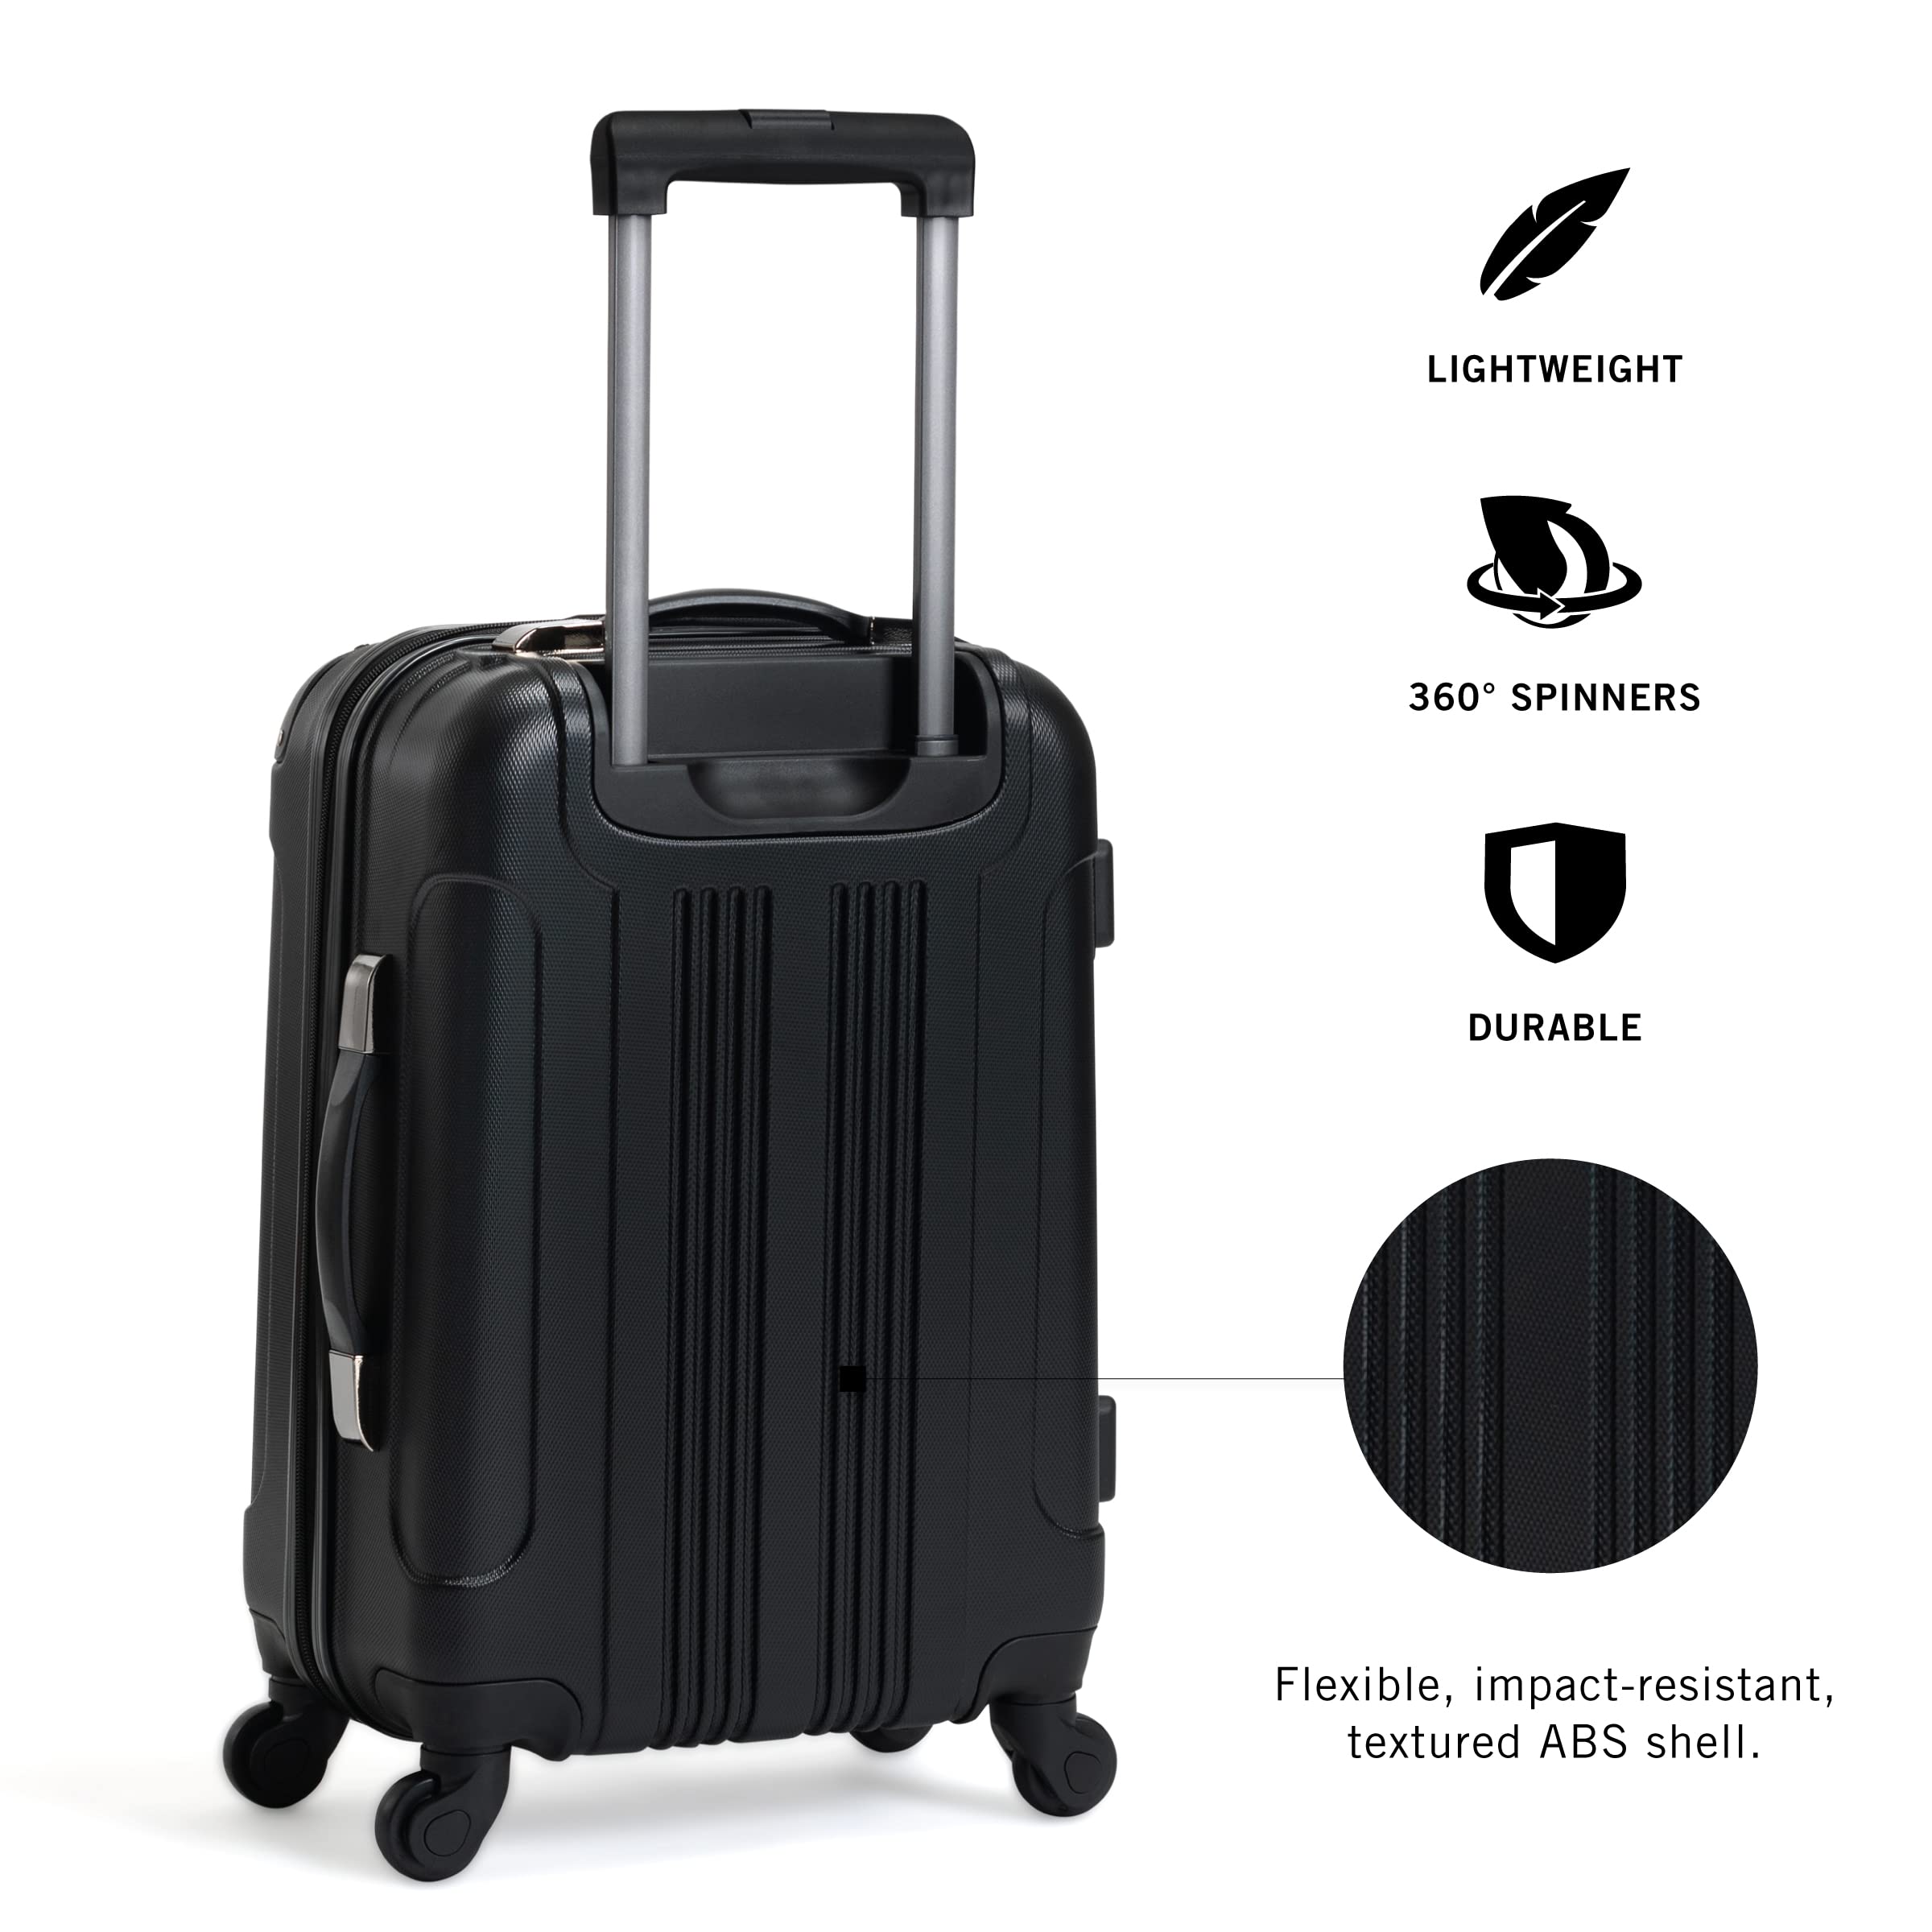 Kenneth Cole Reaction Out Of Bounds 20-Inch Carry-On Lightweight Durable Hardshell 4-Wheel Spinner Cabin Size Luggage, Midnight Black